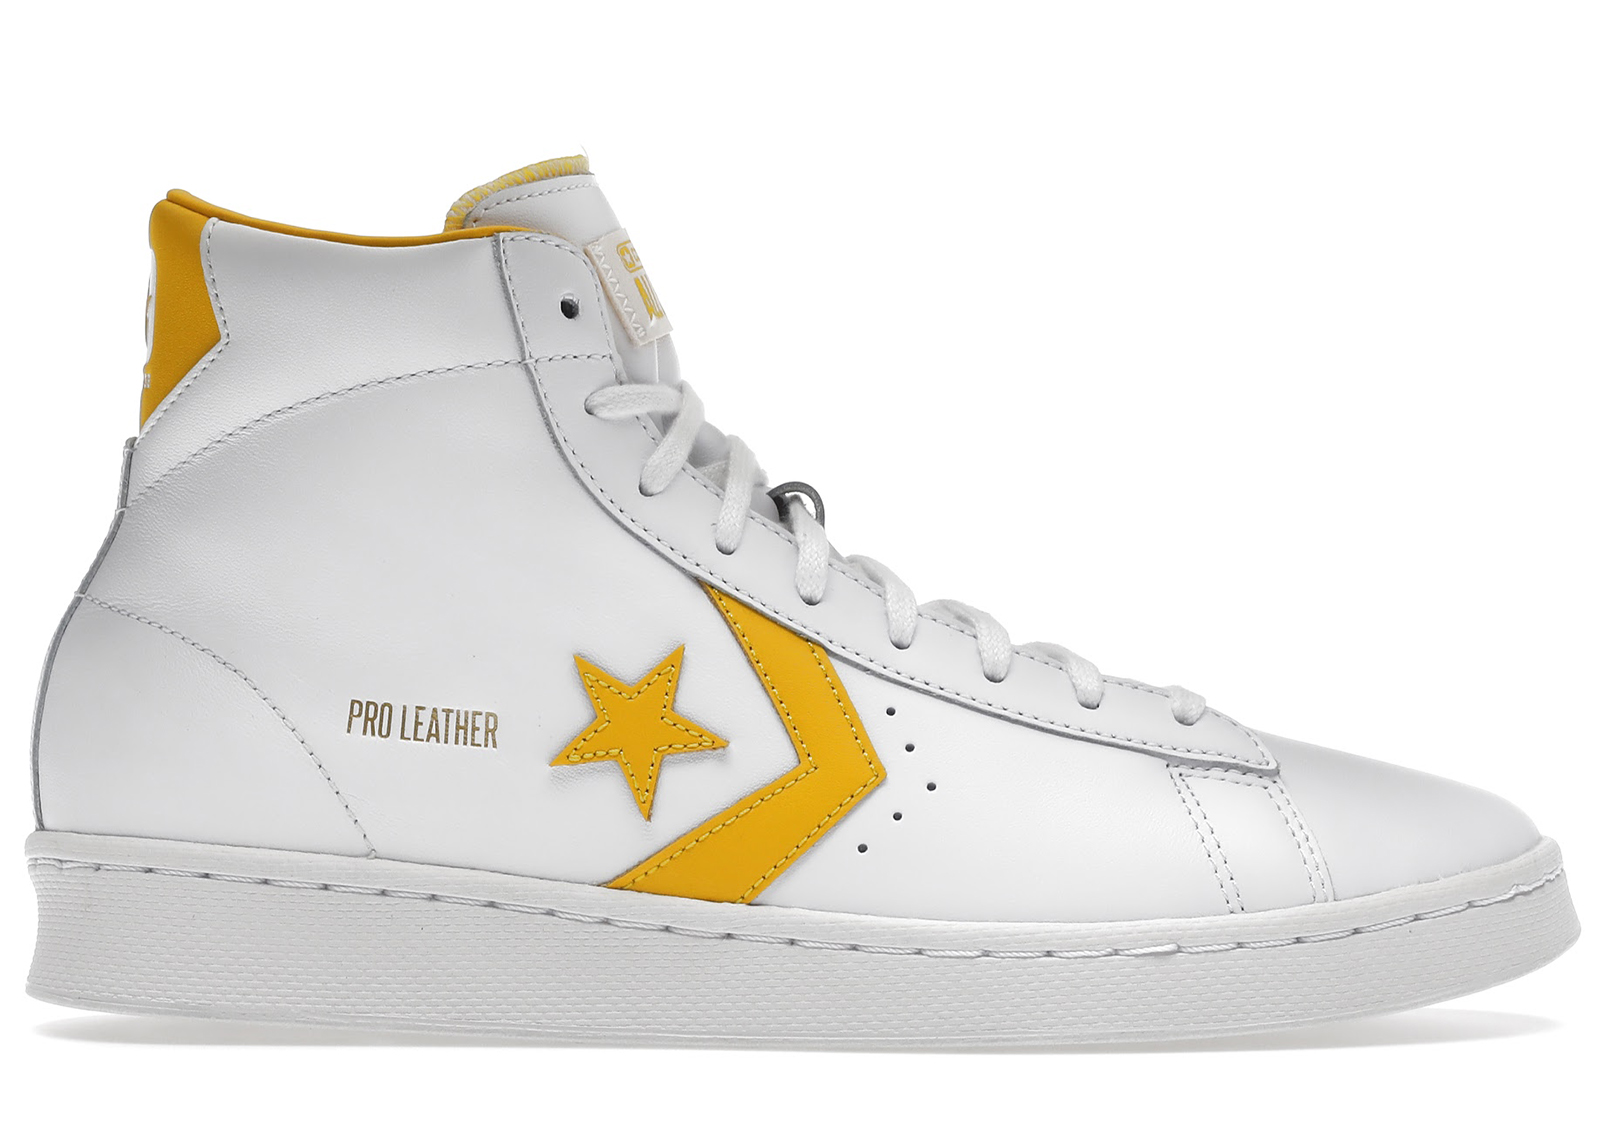 Converse Pro Leather Hi Chase the Drip PJ Tucker メンズ - A01790C - JP